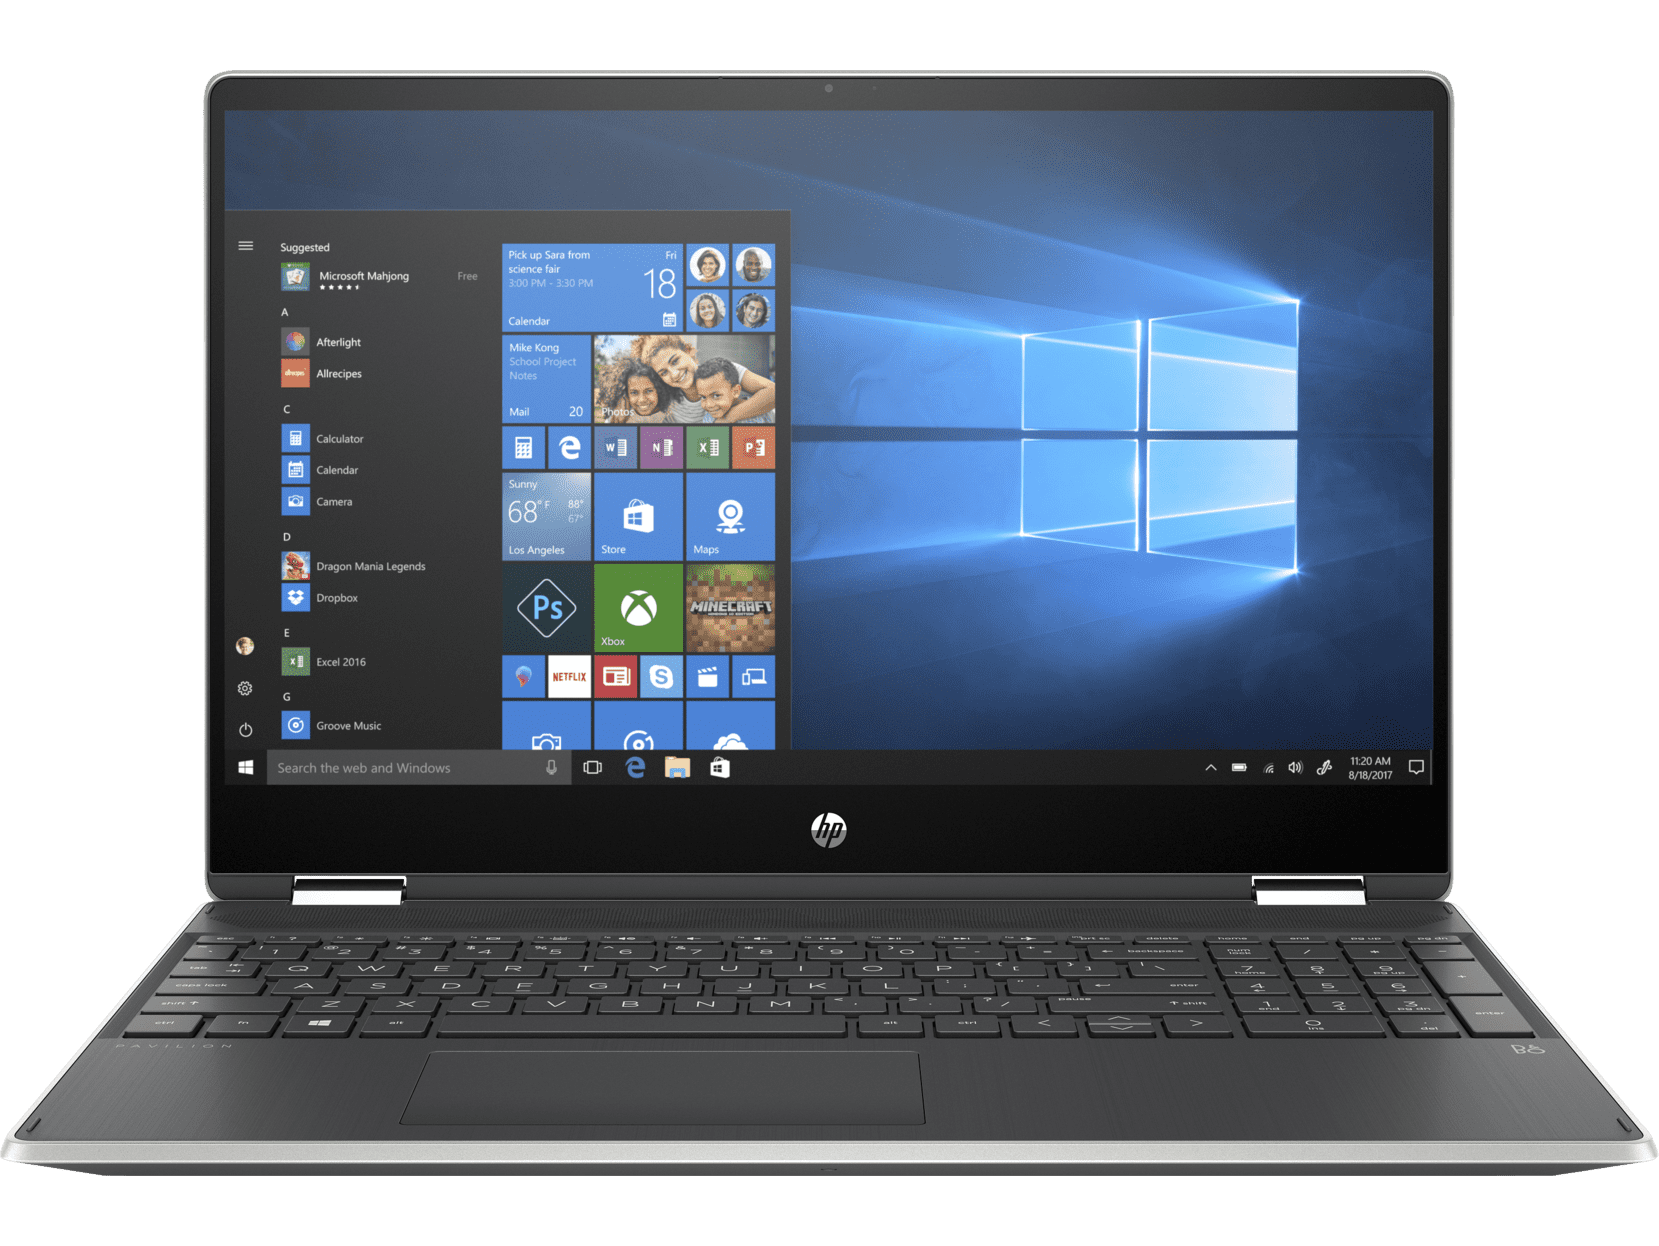 HP Pavilion 15-dq1020nr Home and Business Laptop (Intel i5-10210U 4